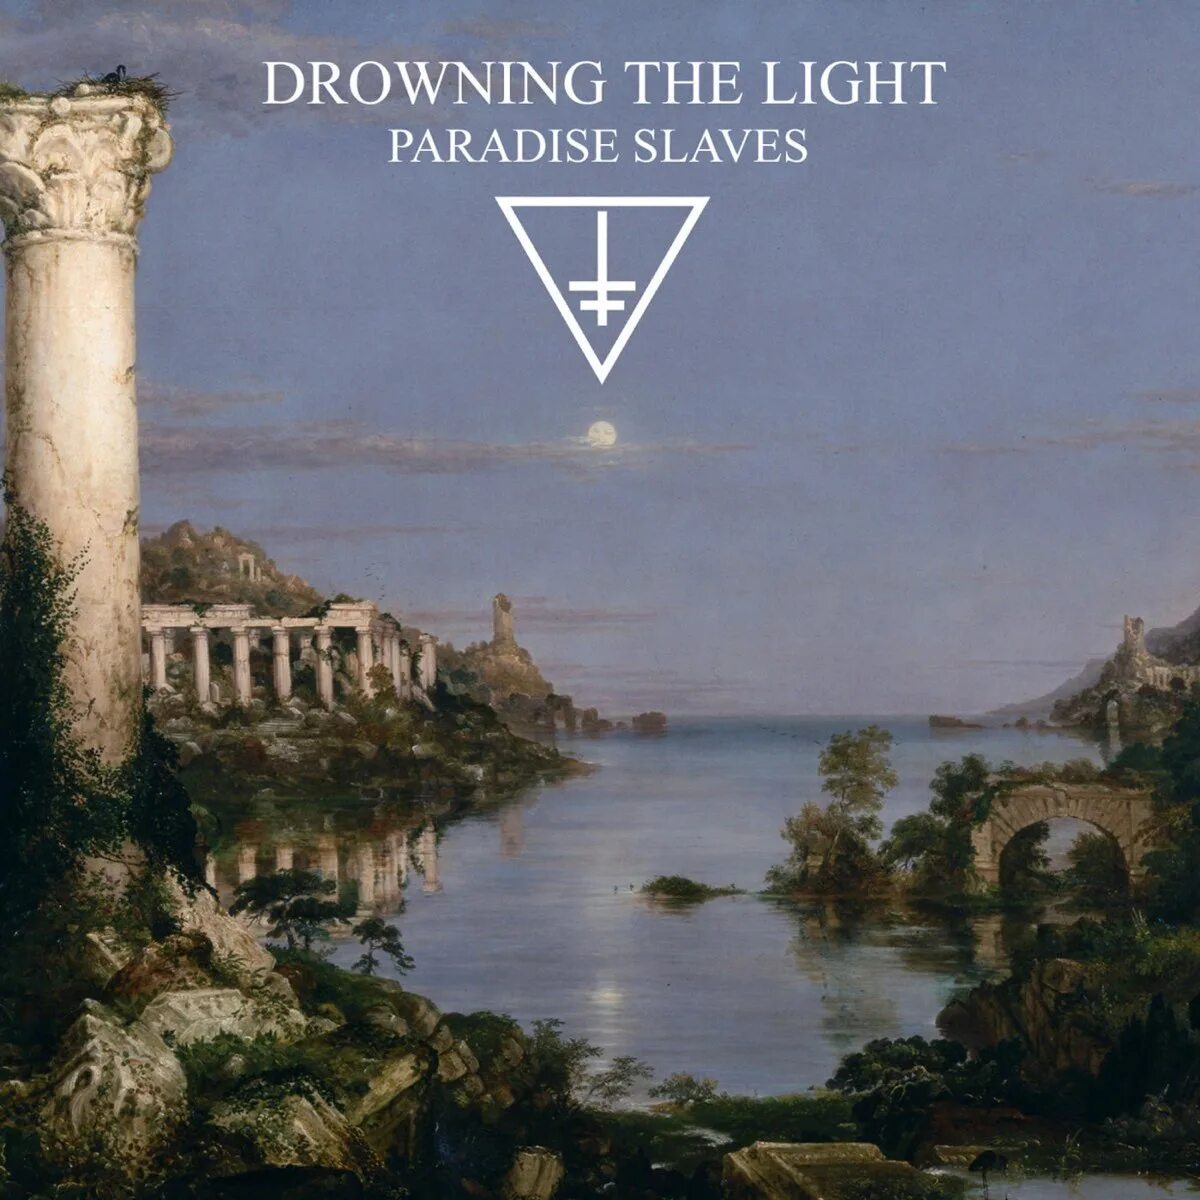 Drowning the light. Drowning the Light album Cover. Drowning the Light logo. Slaves album Cover.